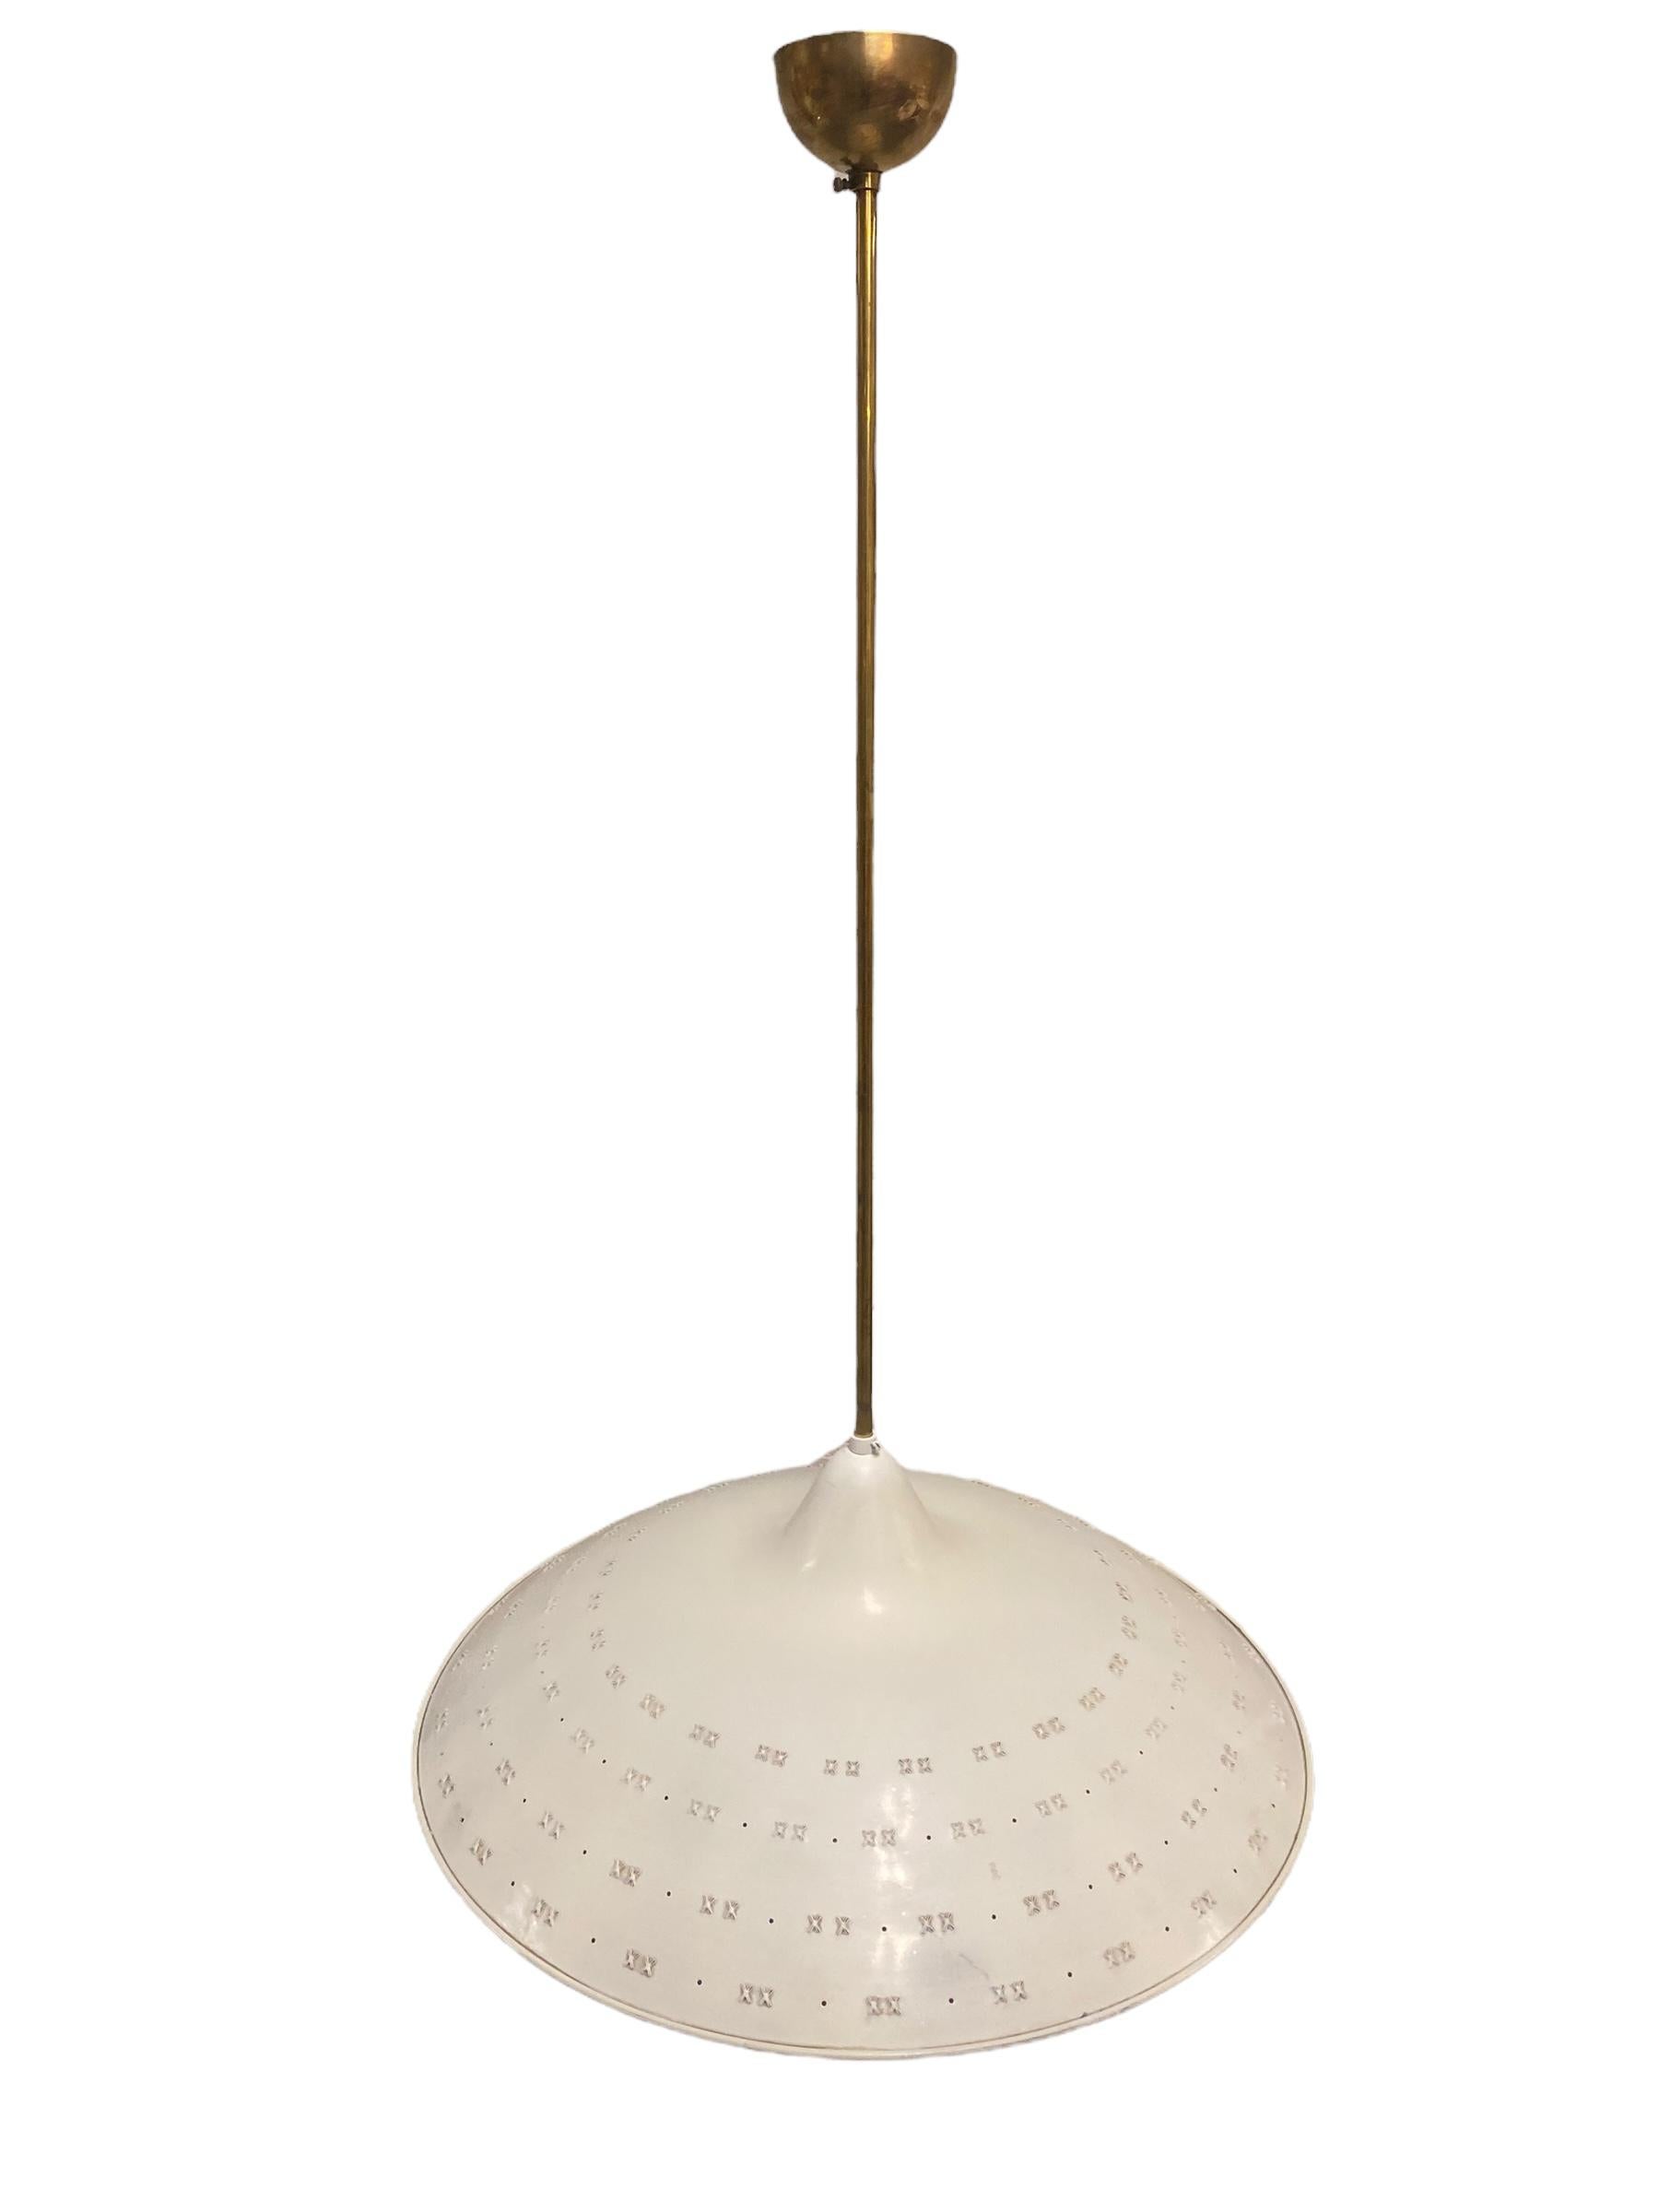 A Rare Lisa-Johansson Pape Ceiling Lamp FN 03-433, Orno 1950s For Sale 3